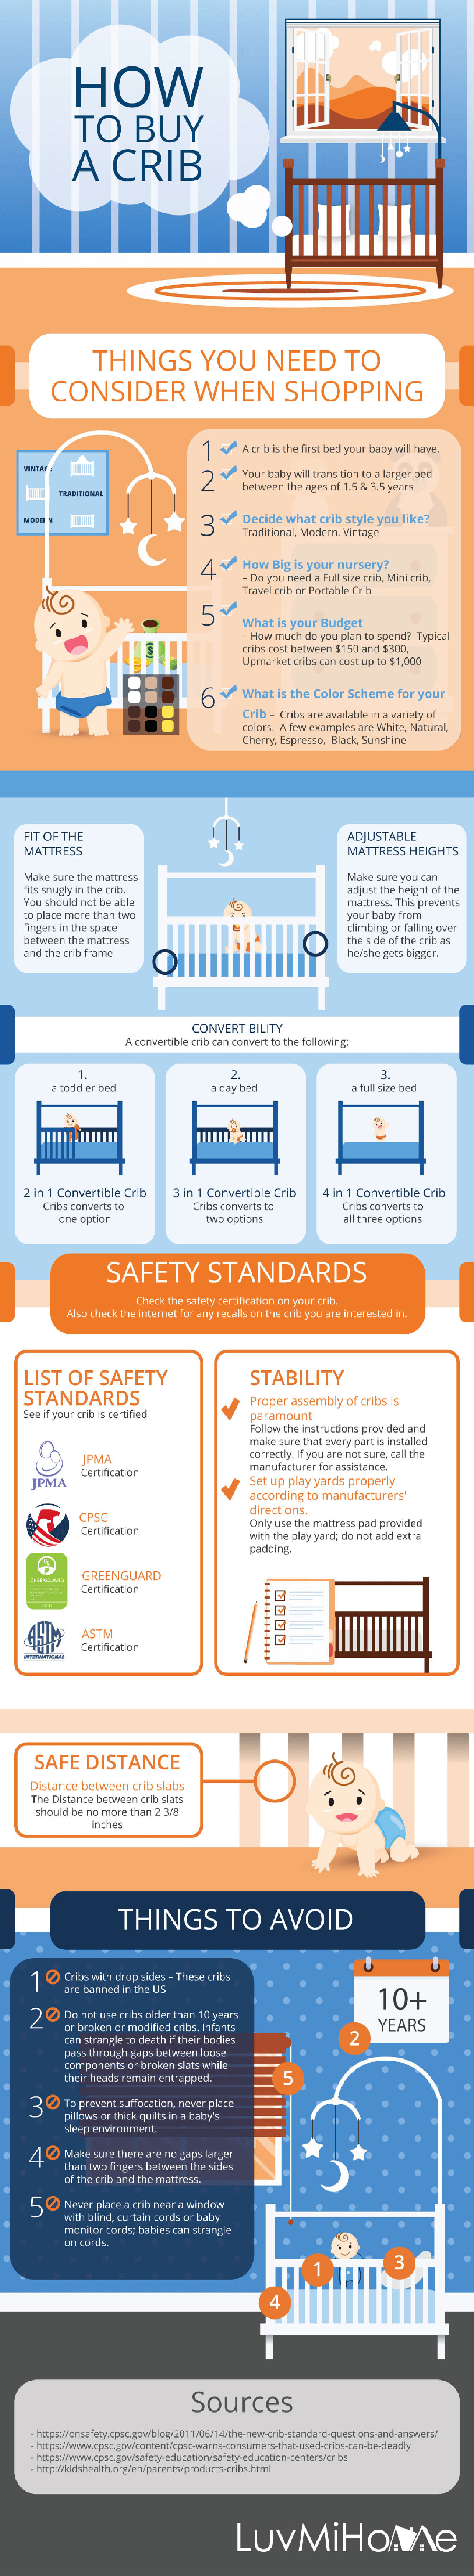 Do's and Don'ts of Buying a Baby Crib - Parenting Infographic